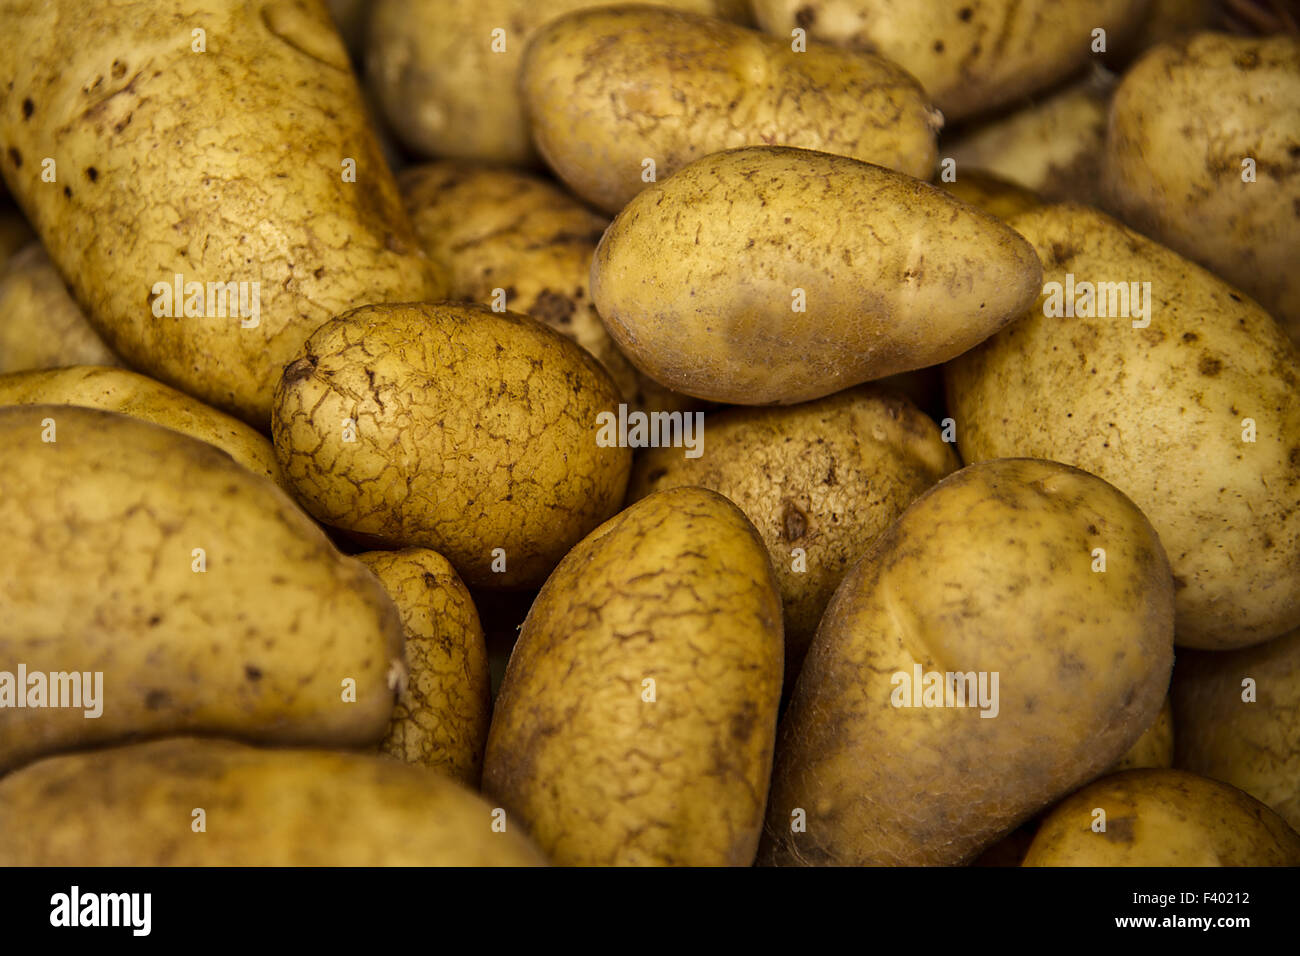 Kartoffel Sorten High Resolution Stock Photography and Images - Alamy